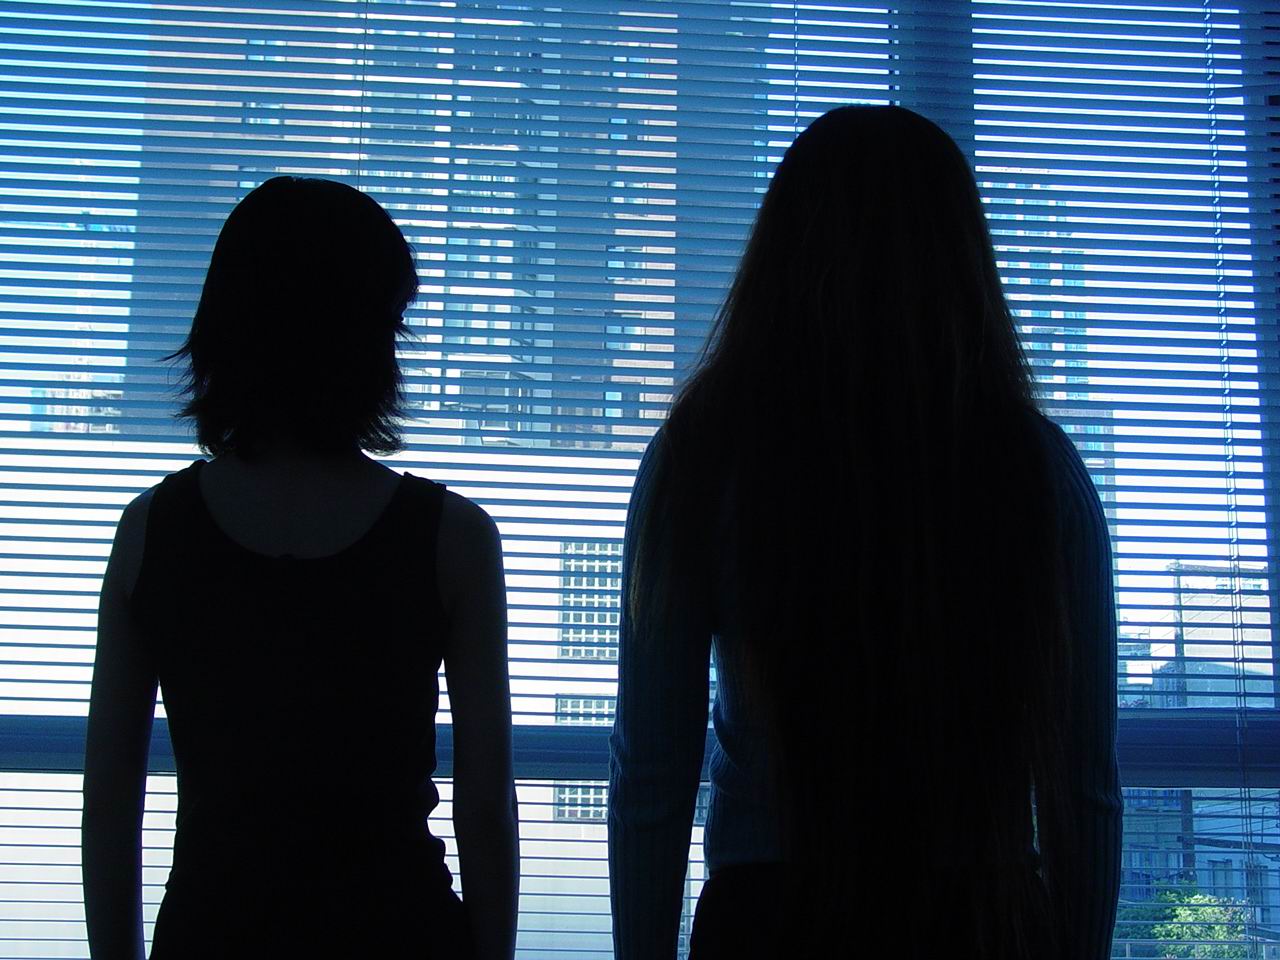 Still from Sisters. The figures of two people are shown in silhouette, looking out through Venetian blinds at the cityscape.